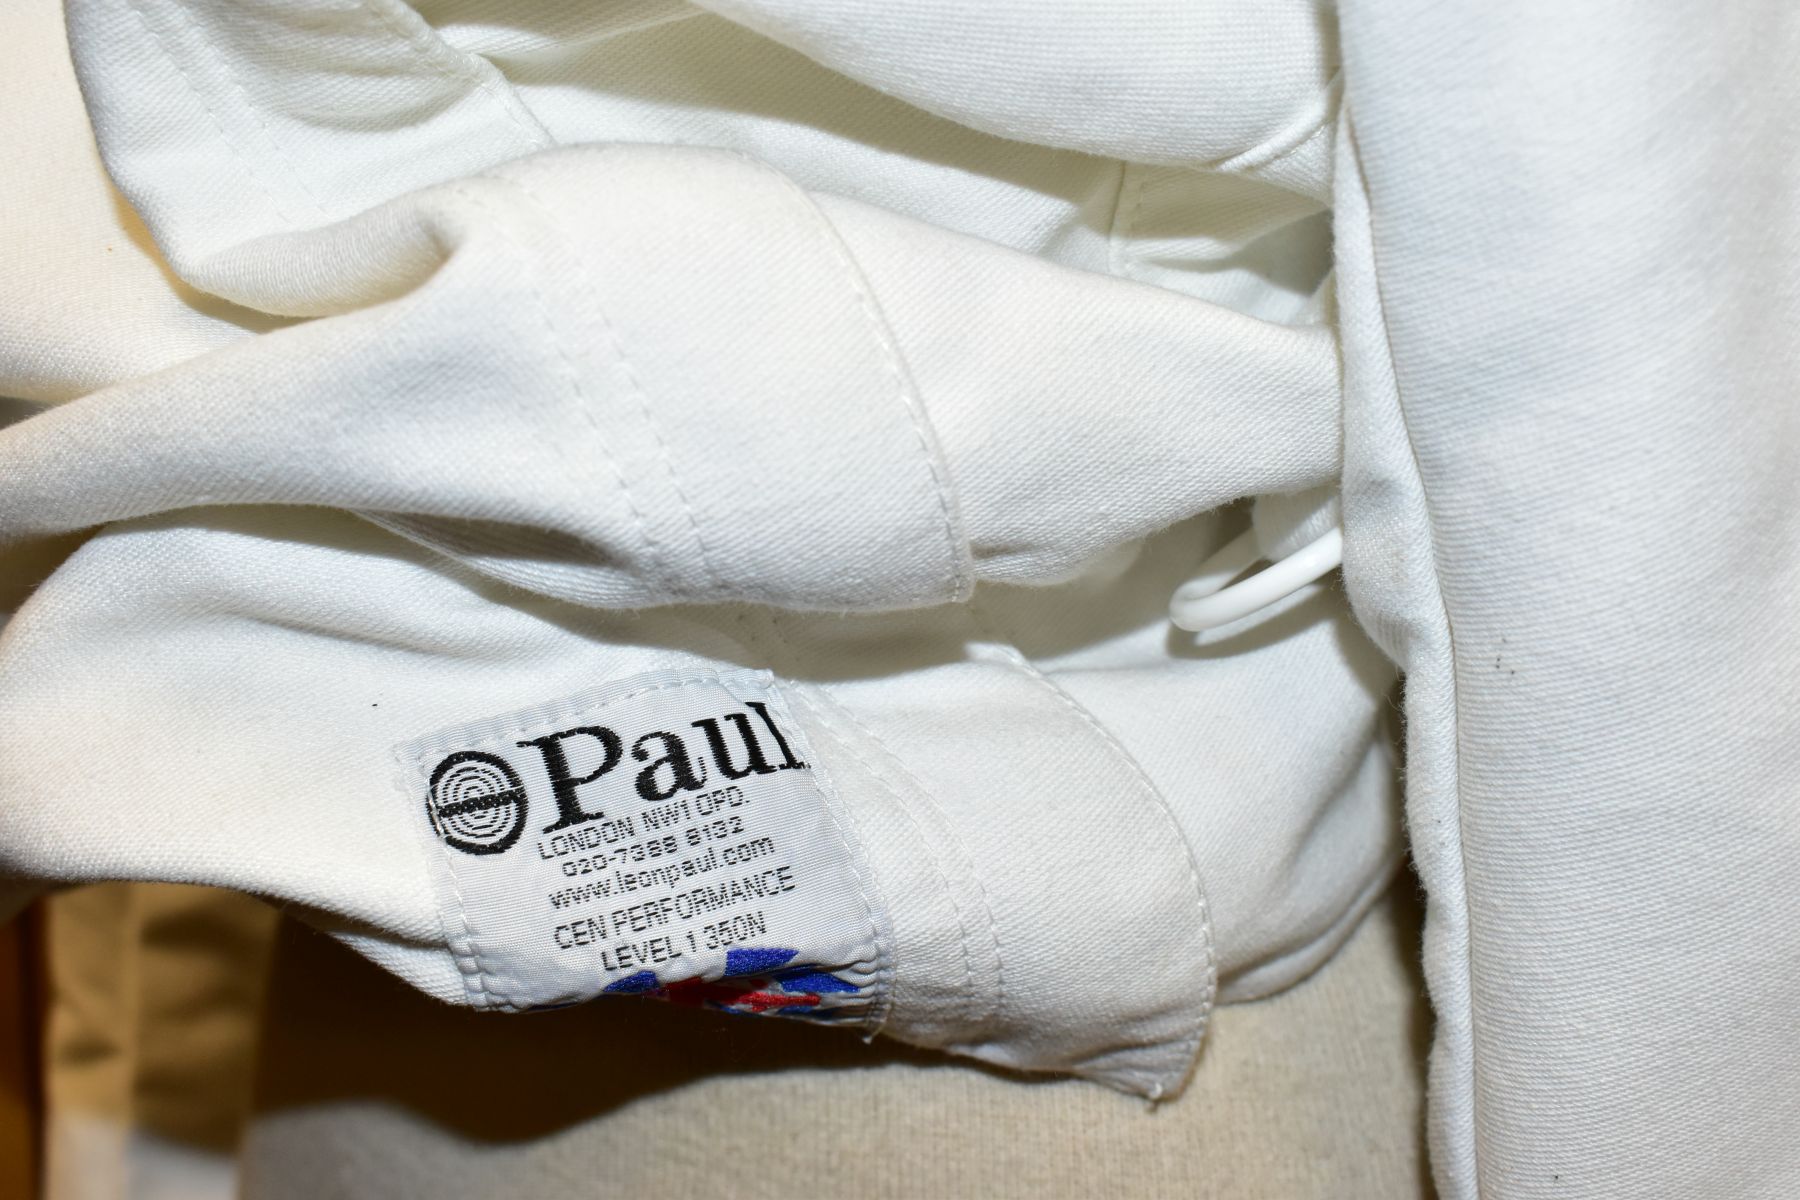 LEON PAUL FENCING MASK, JACKET, FOIL AND BAG, together with a glove (unmarked) - Image 3 of 8